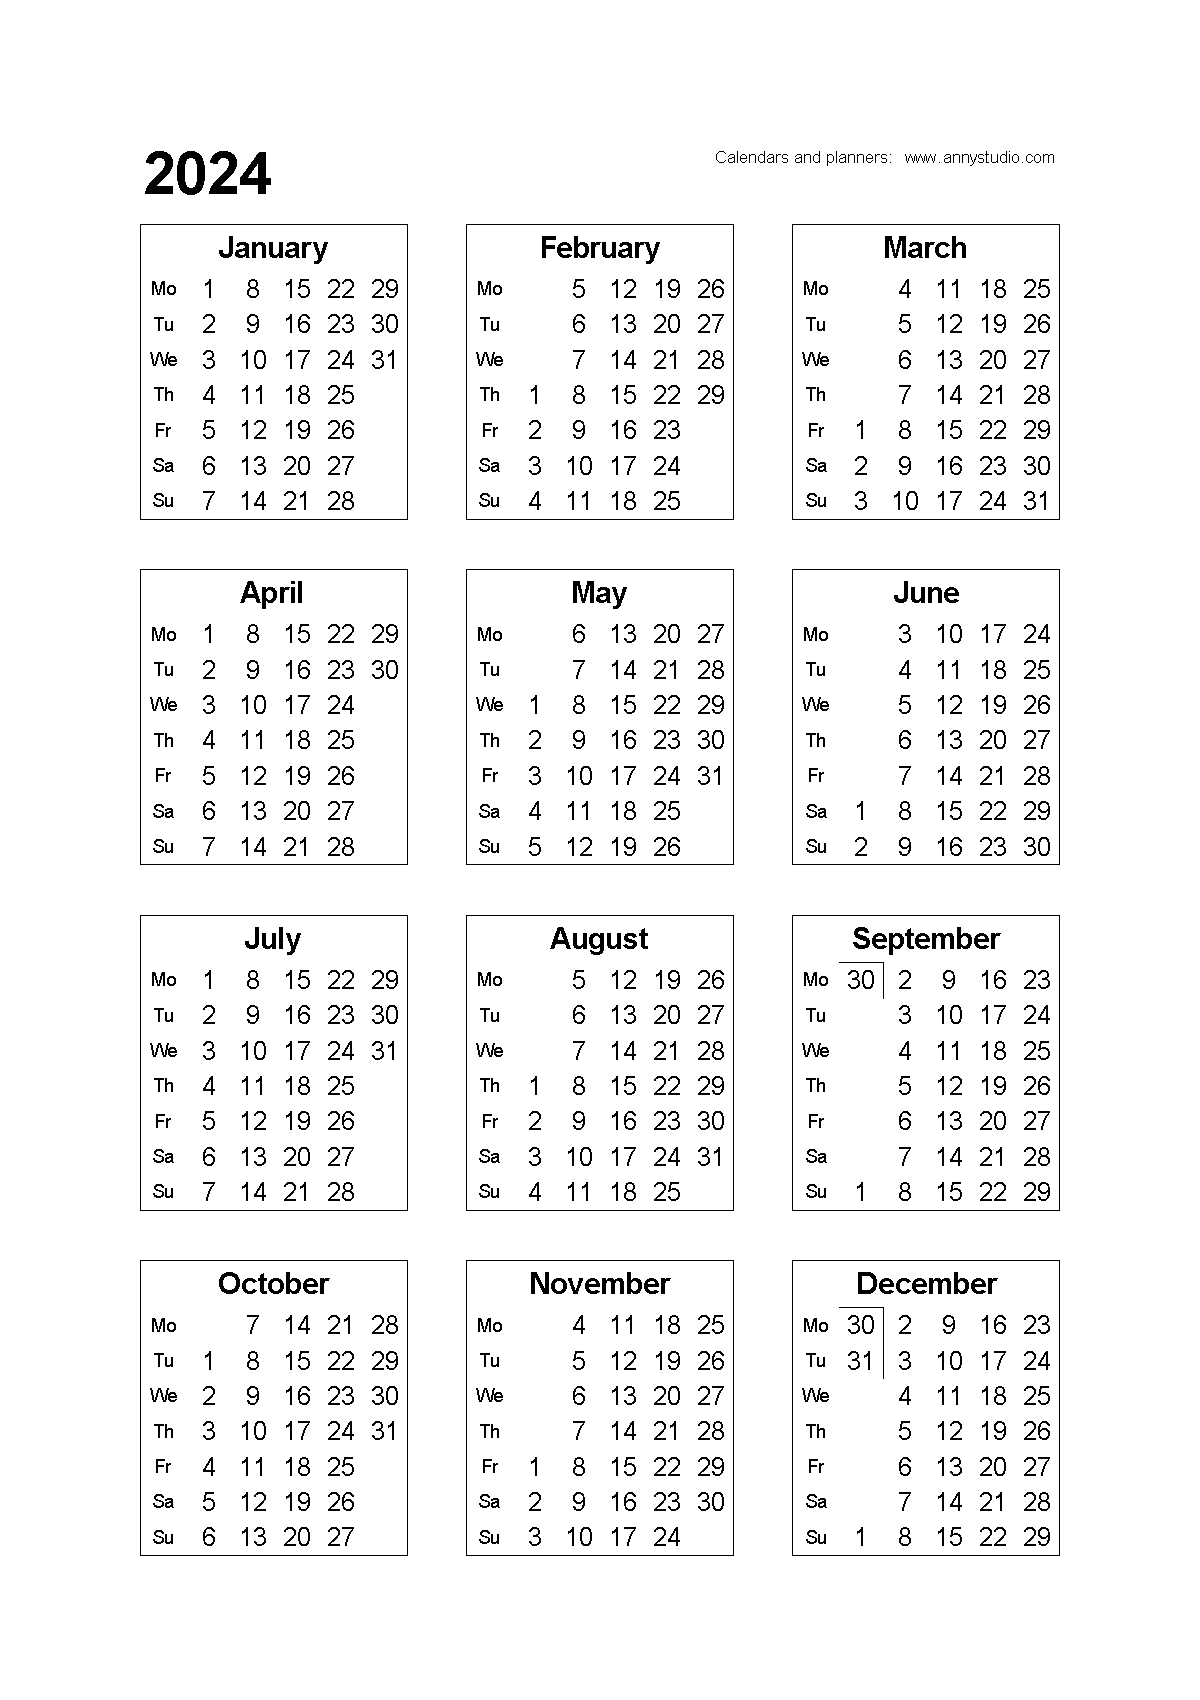 Free Printable Calendars And Planners 2024, 2025 And 2026 | Free Printable Calendar 2024 Calendarlabs